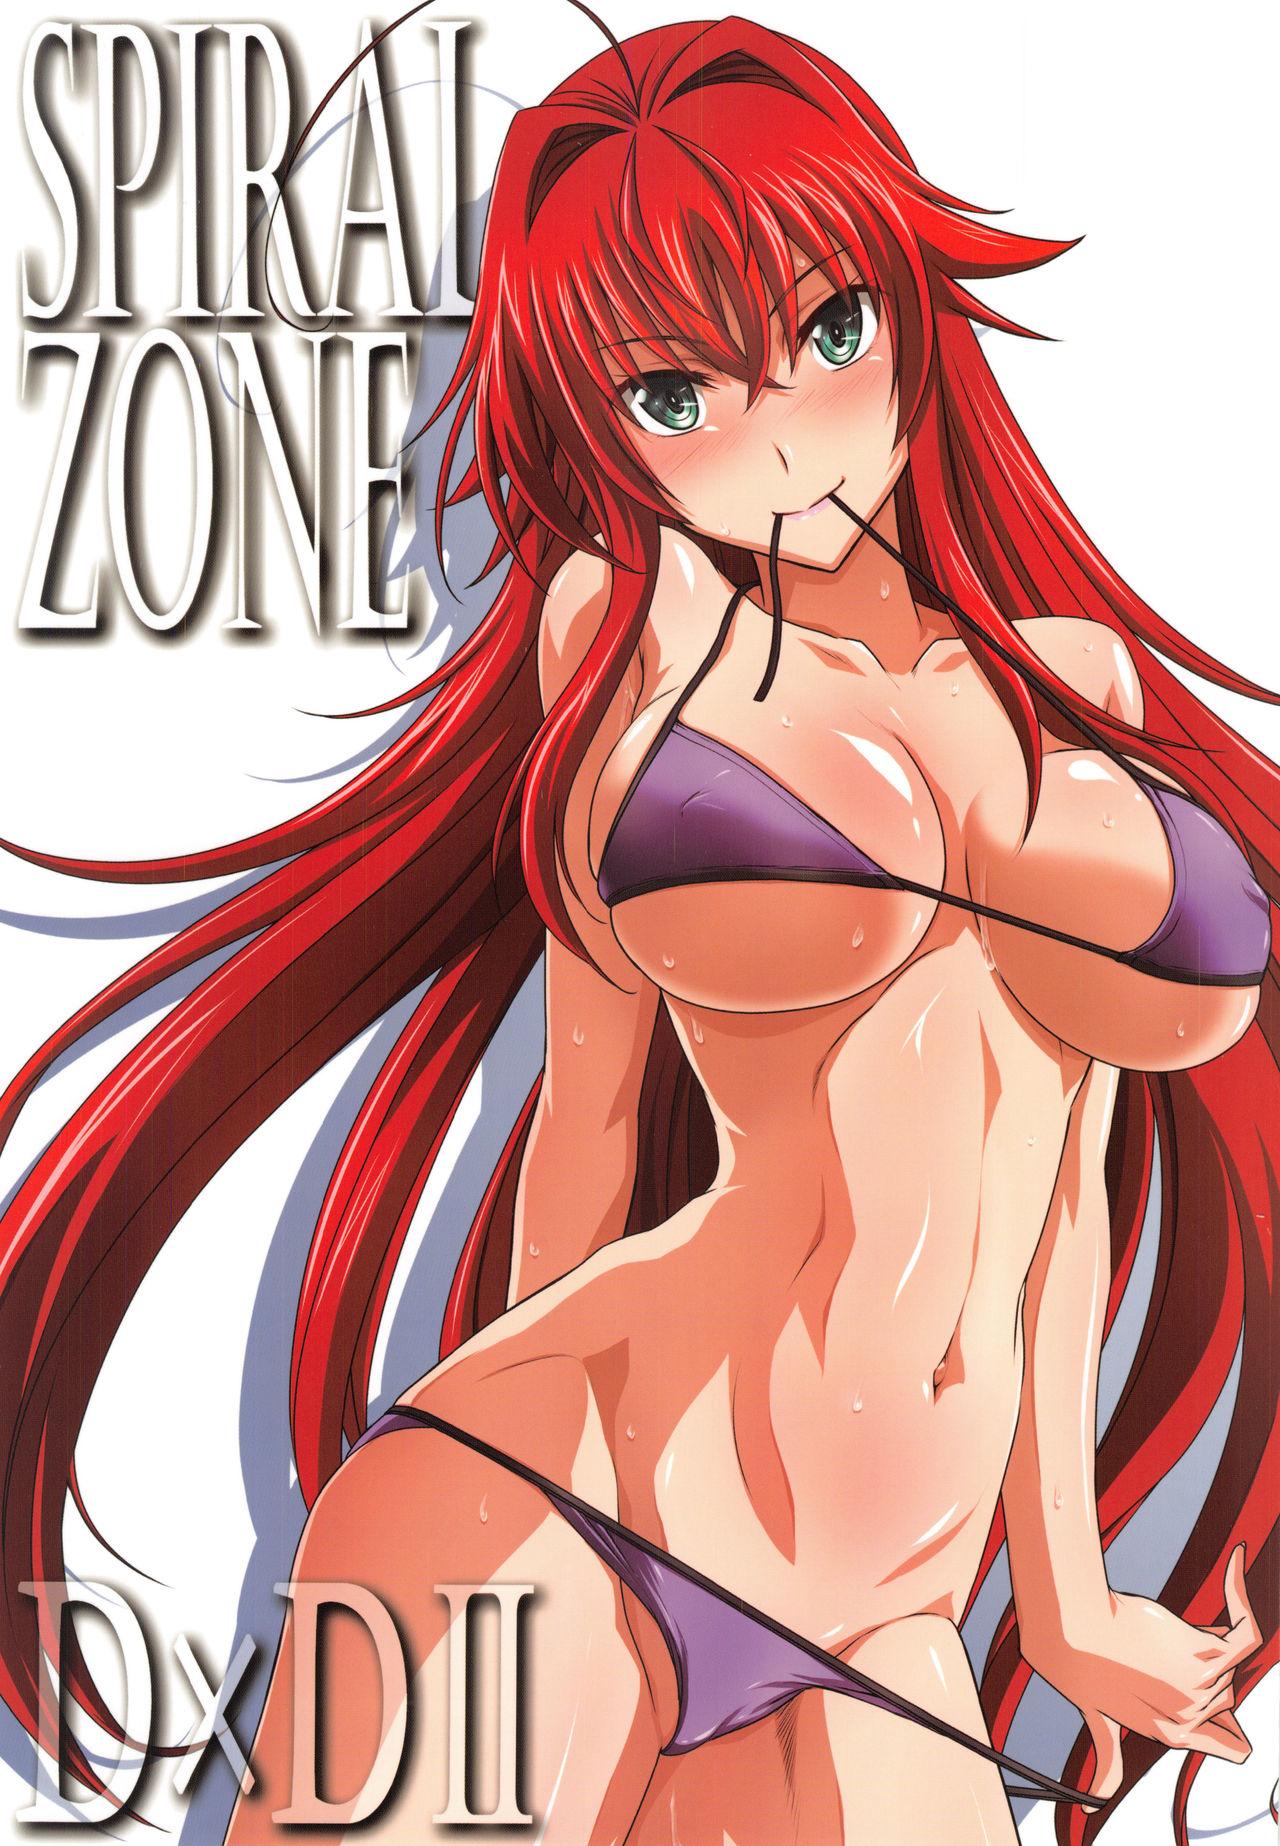 Masterbation SPIRAL ZONE DxD II - Highschool dxd Teens - Page 1